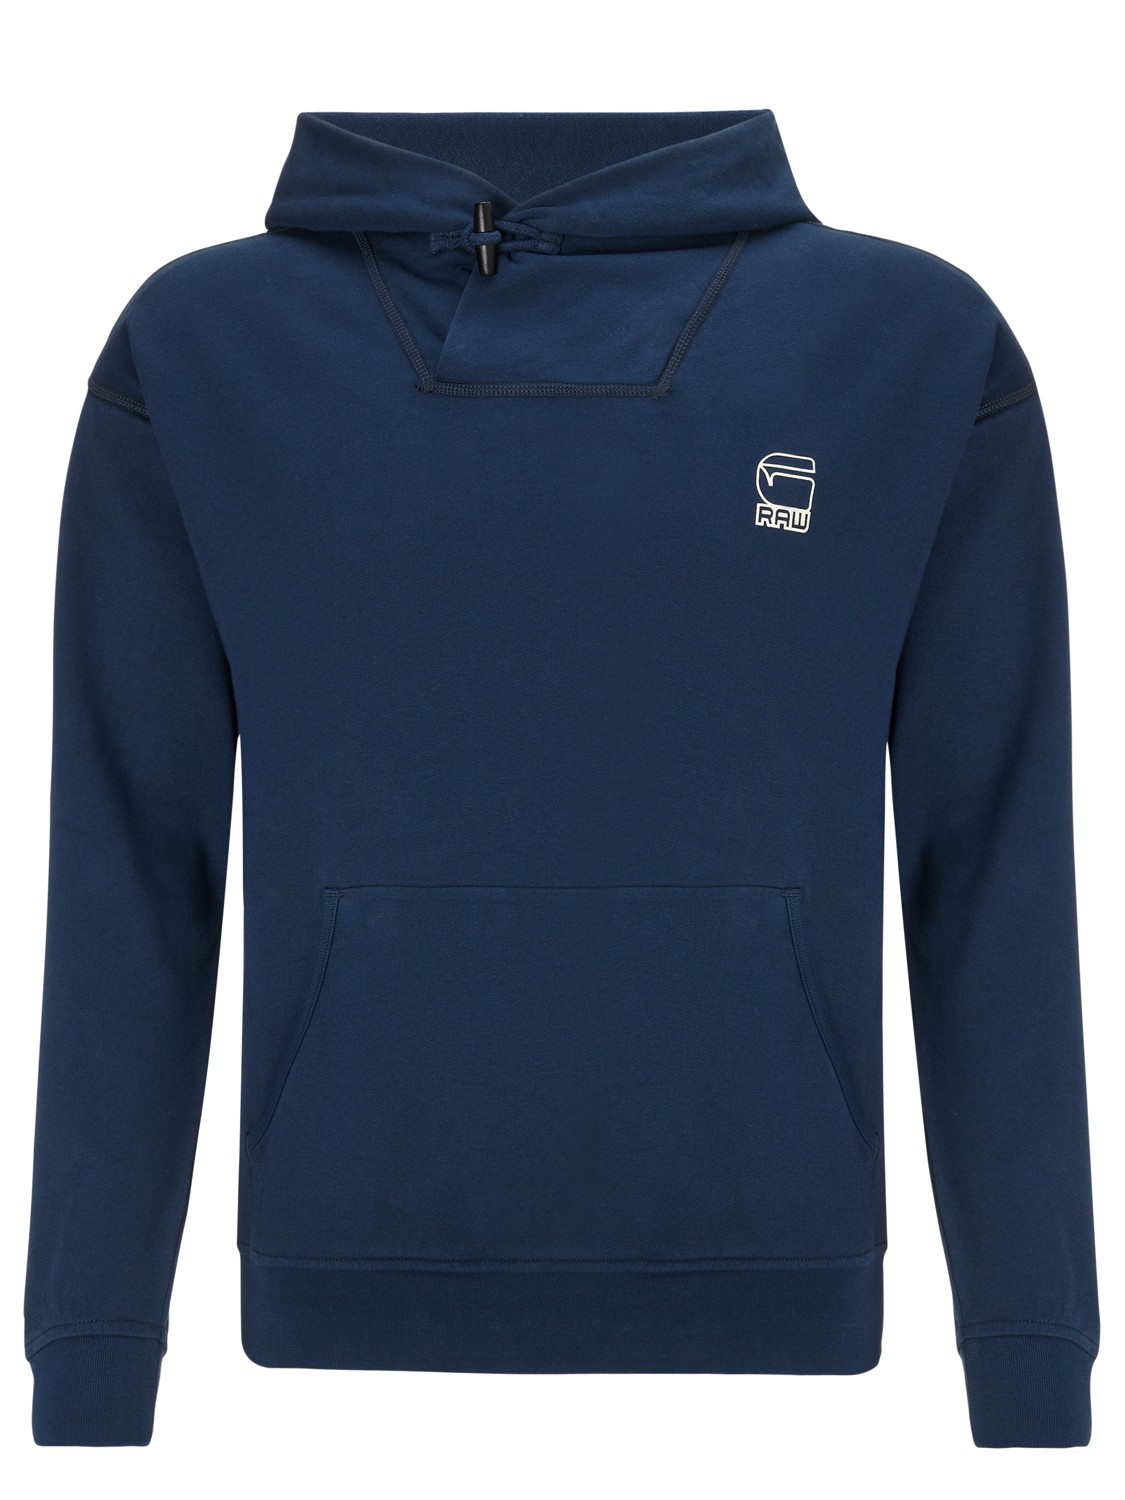 G-star Raw Oliver Hoodie in Blue for Men (Sapphire) | Lyst